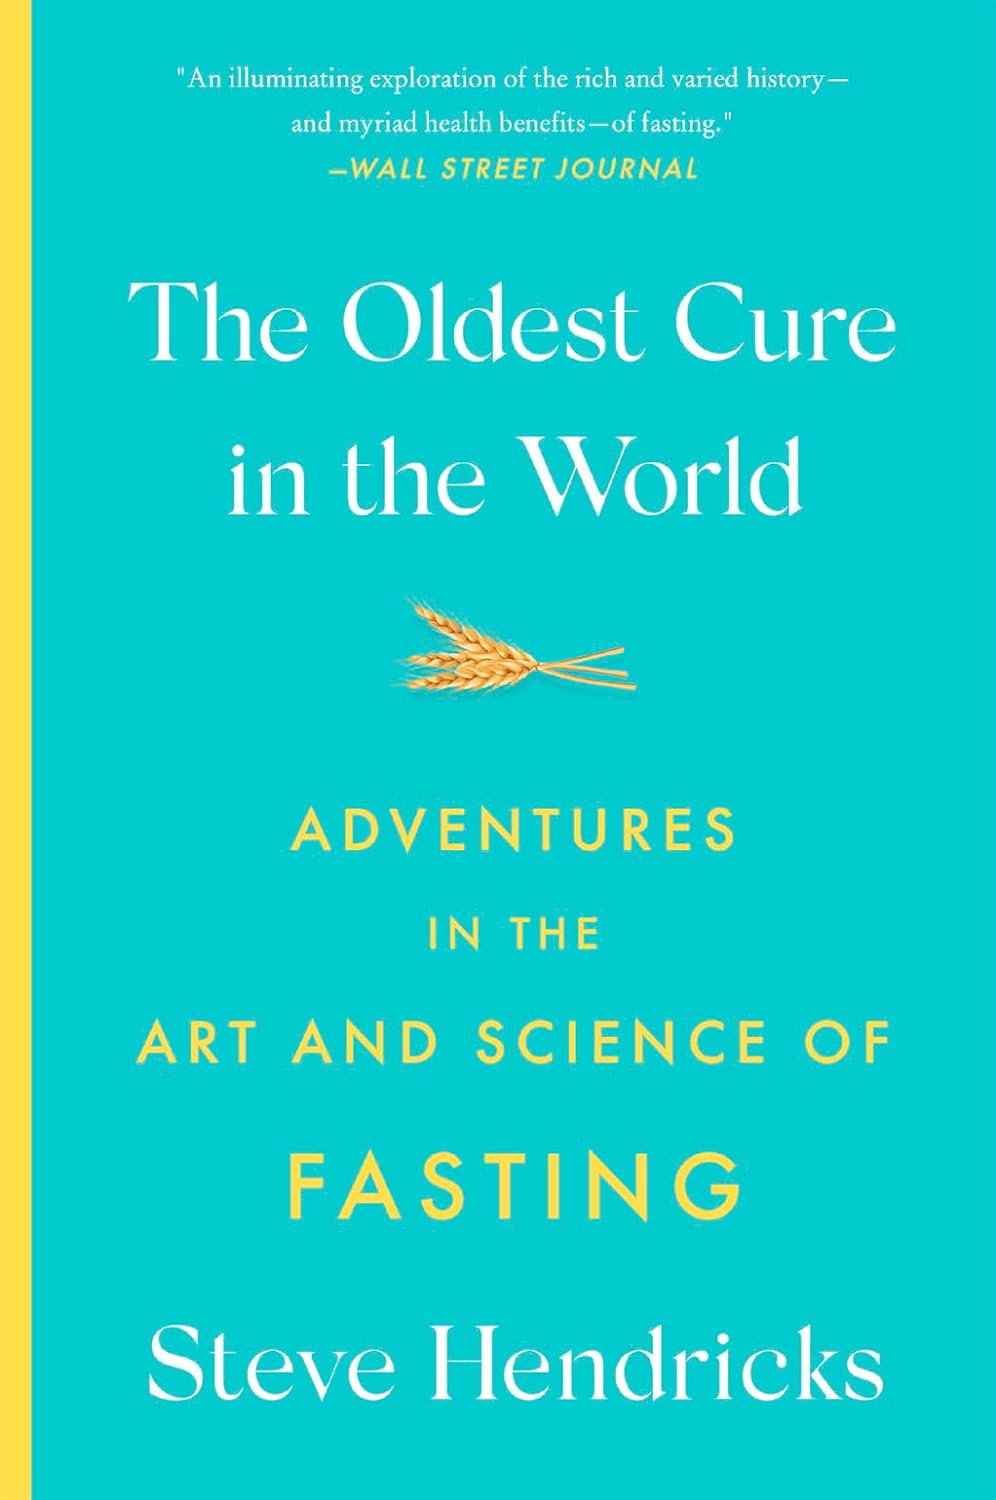 Abrams & Chronicle Books Adventures in the Art and Science of Fasting Book by Steve Hendricks